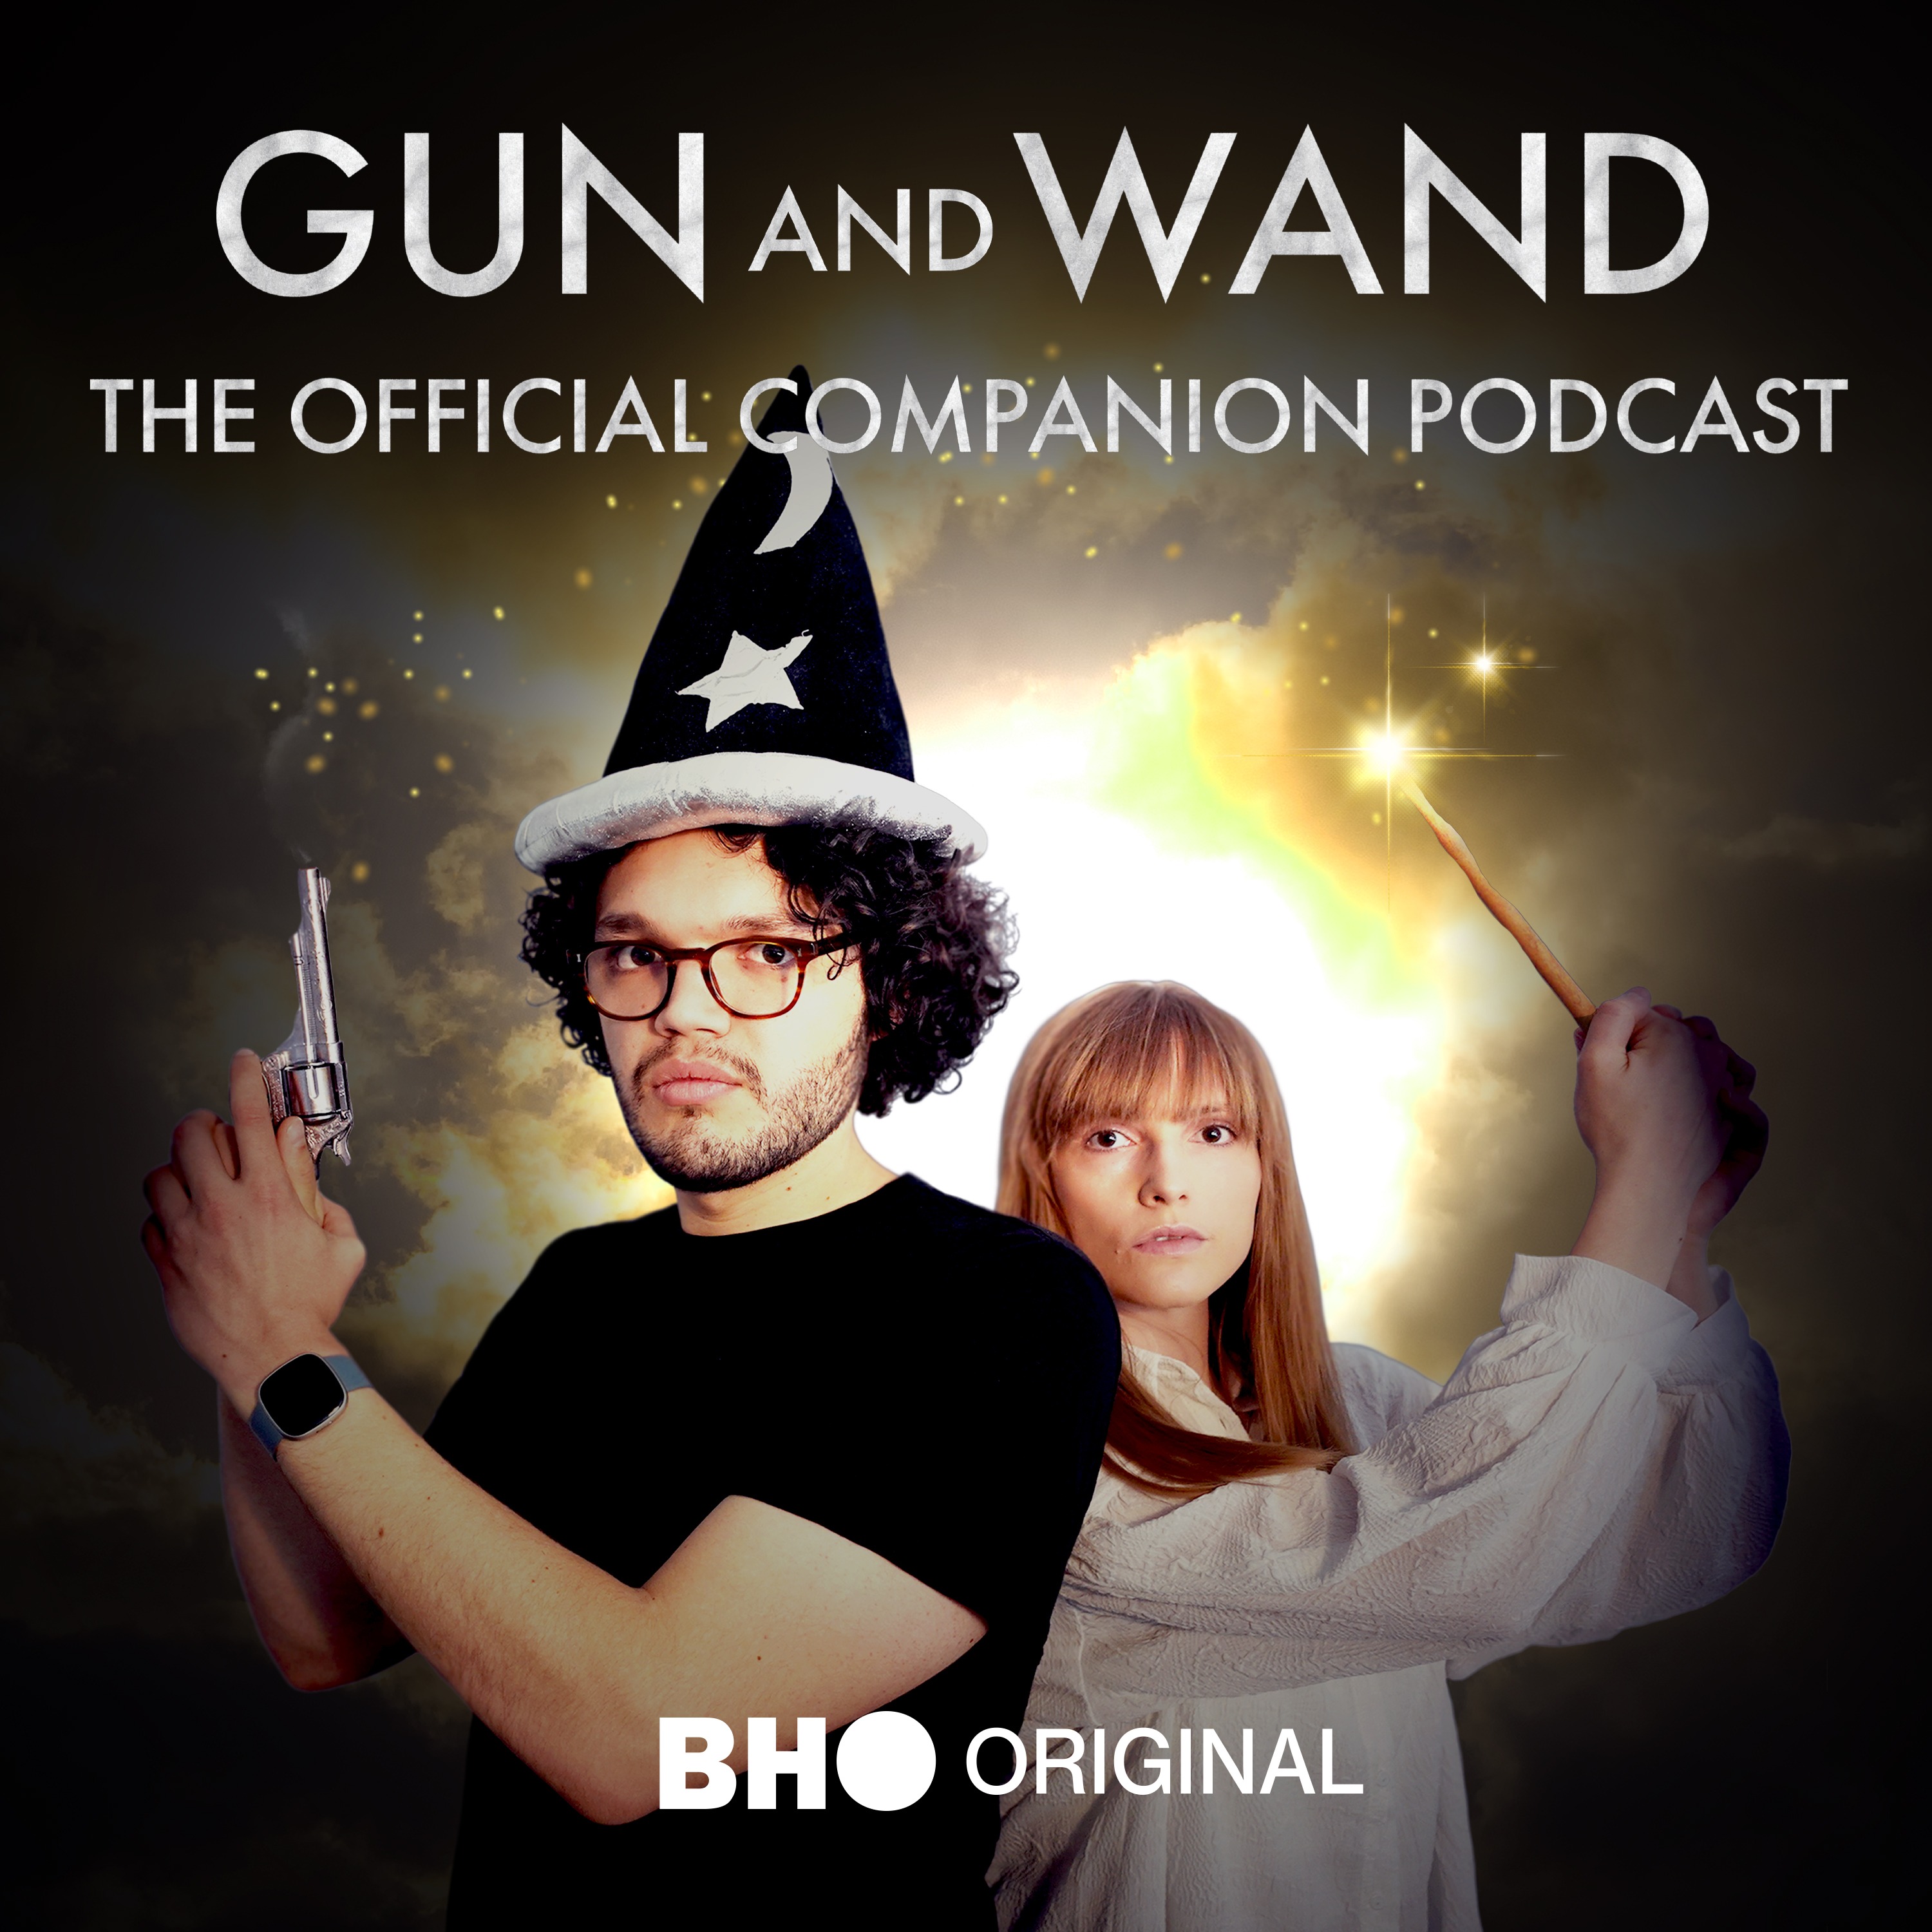 Gun and Wand: The Official Companion Podcast podcast show image